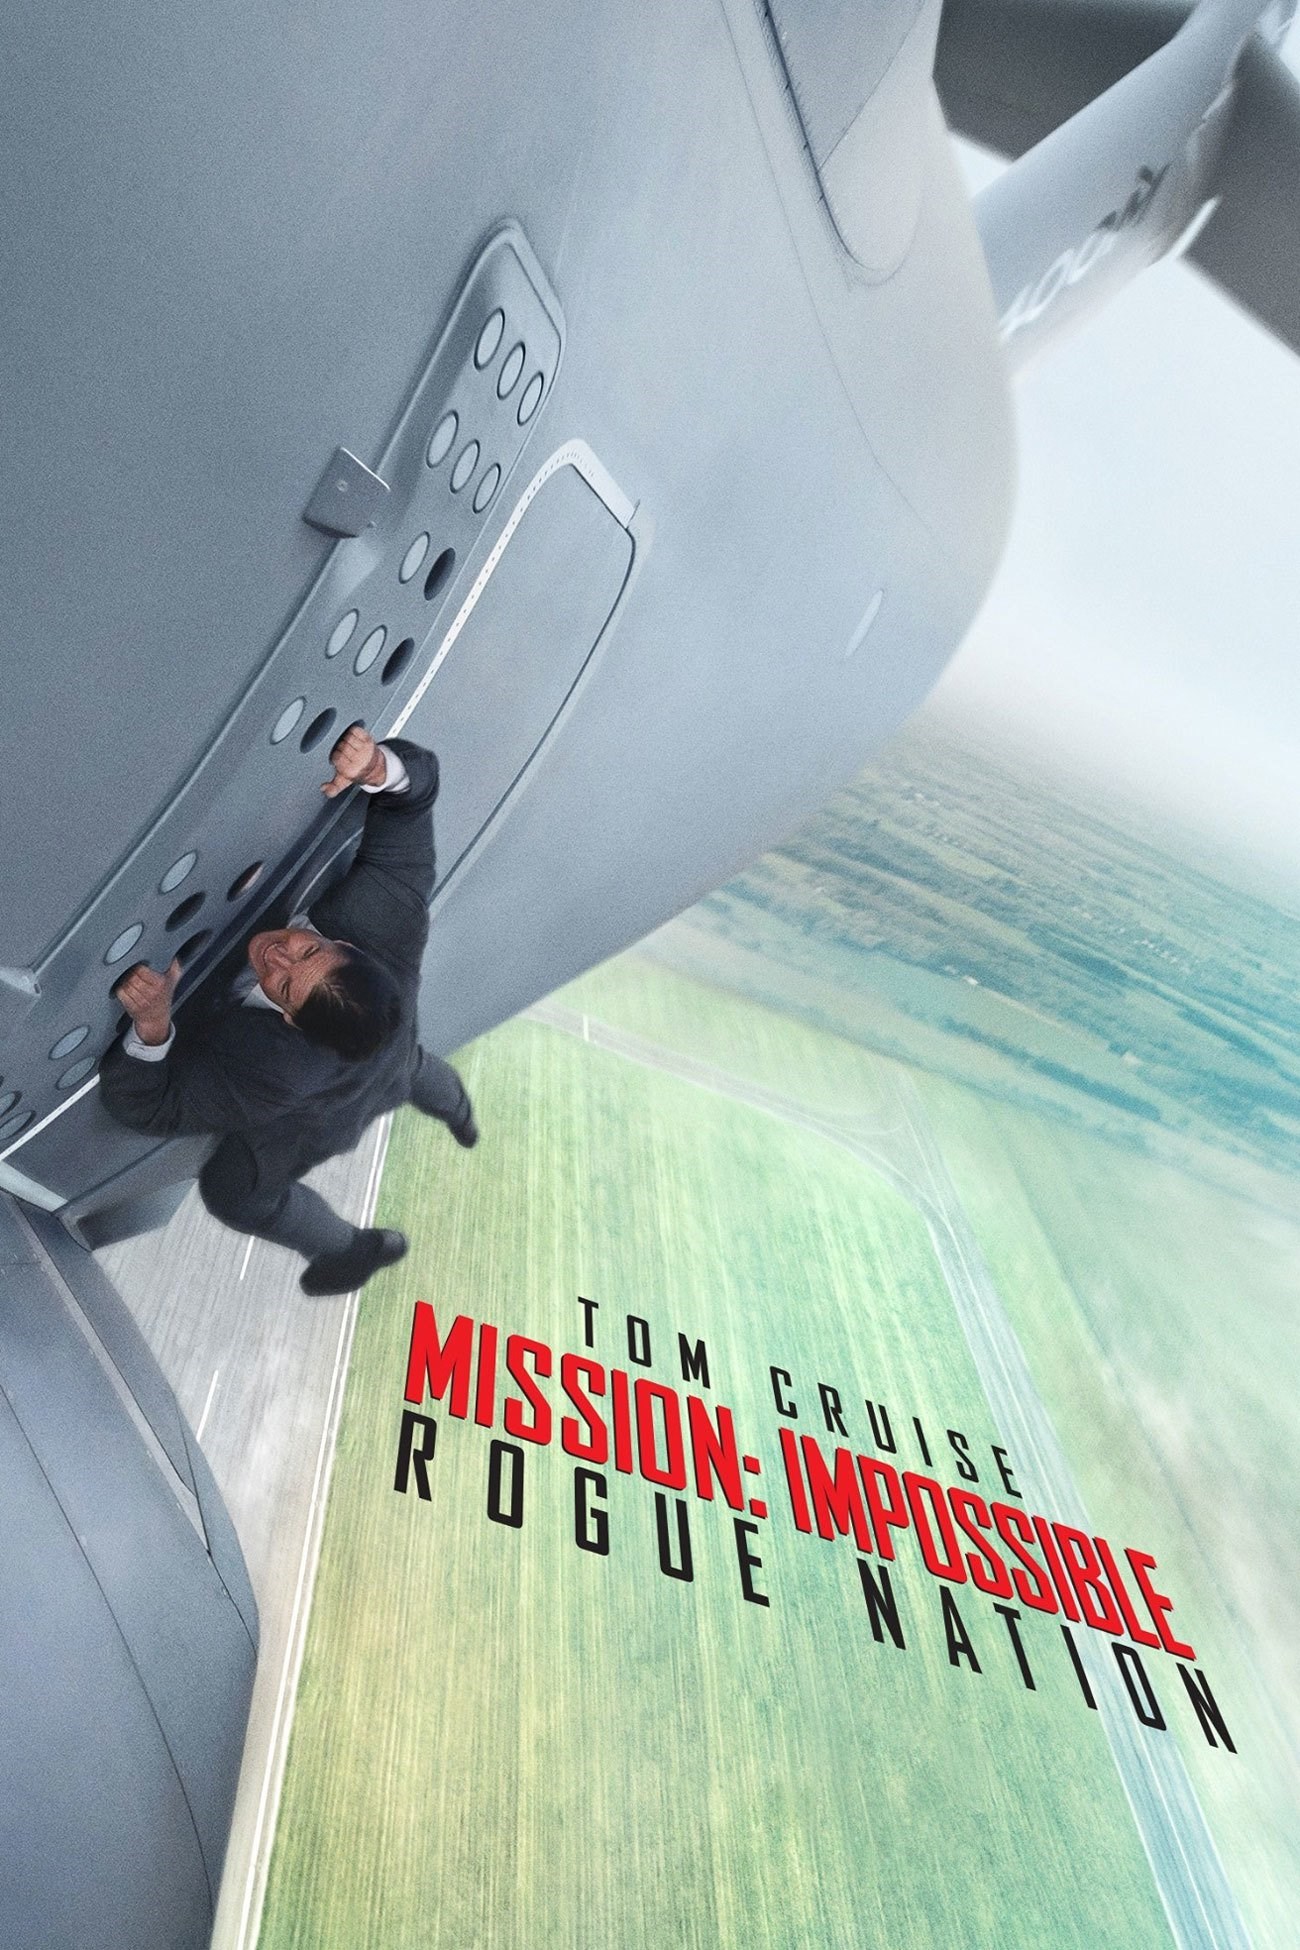 Download Sub Indo Mission Impossible 5